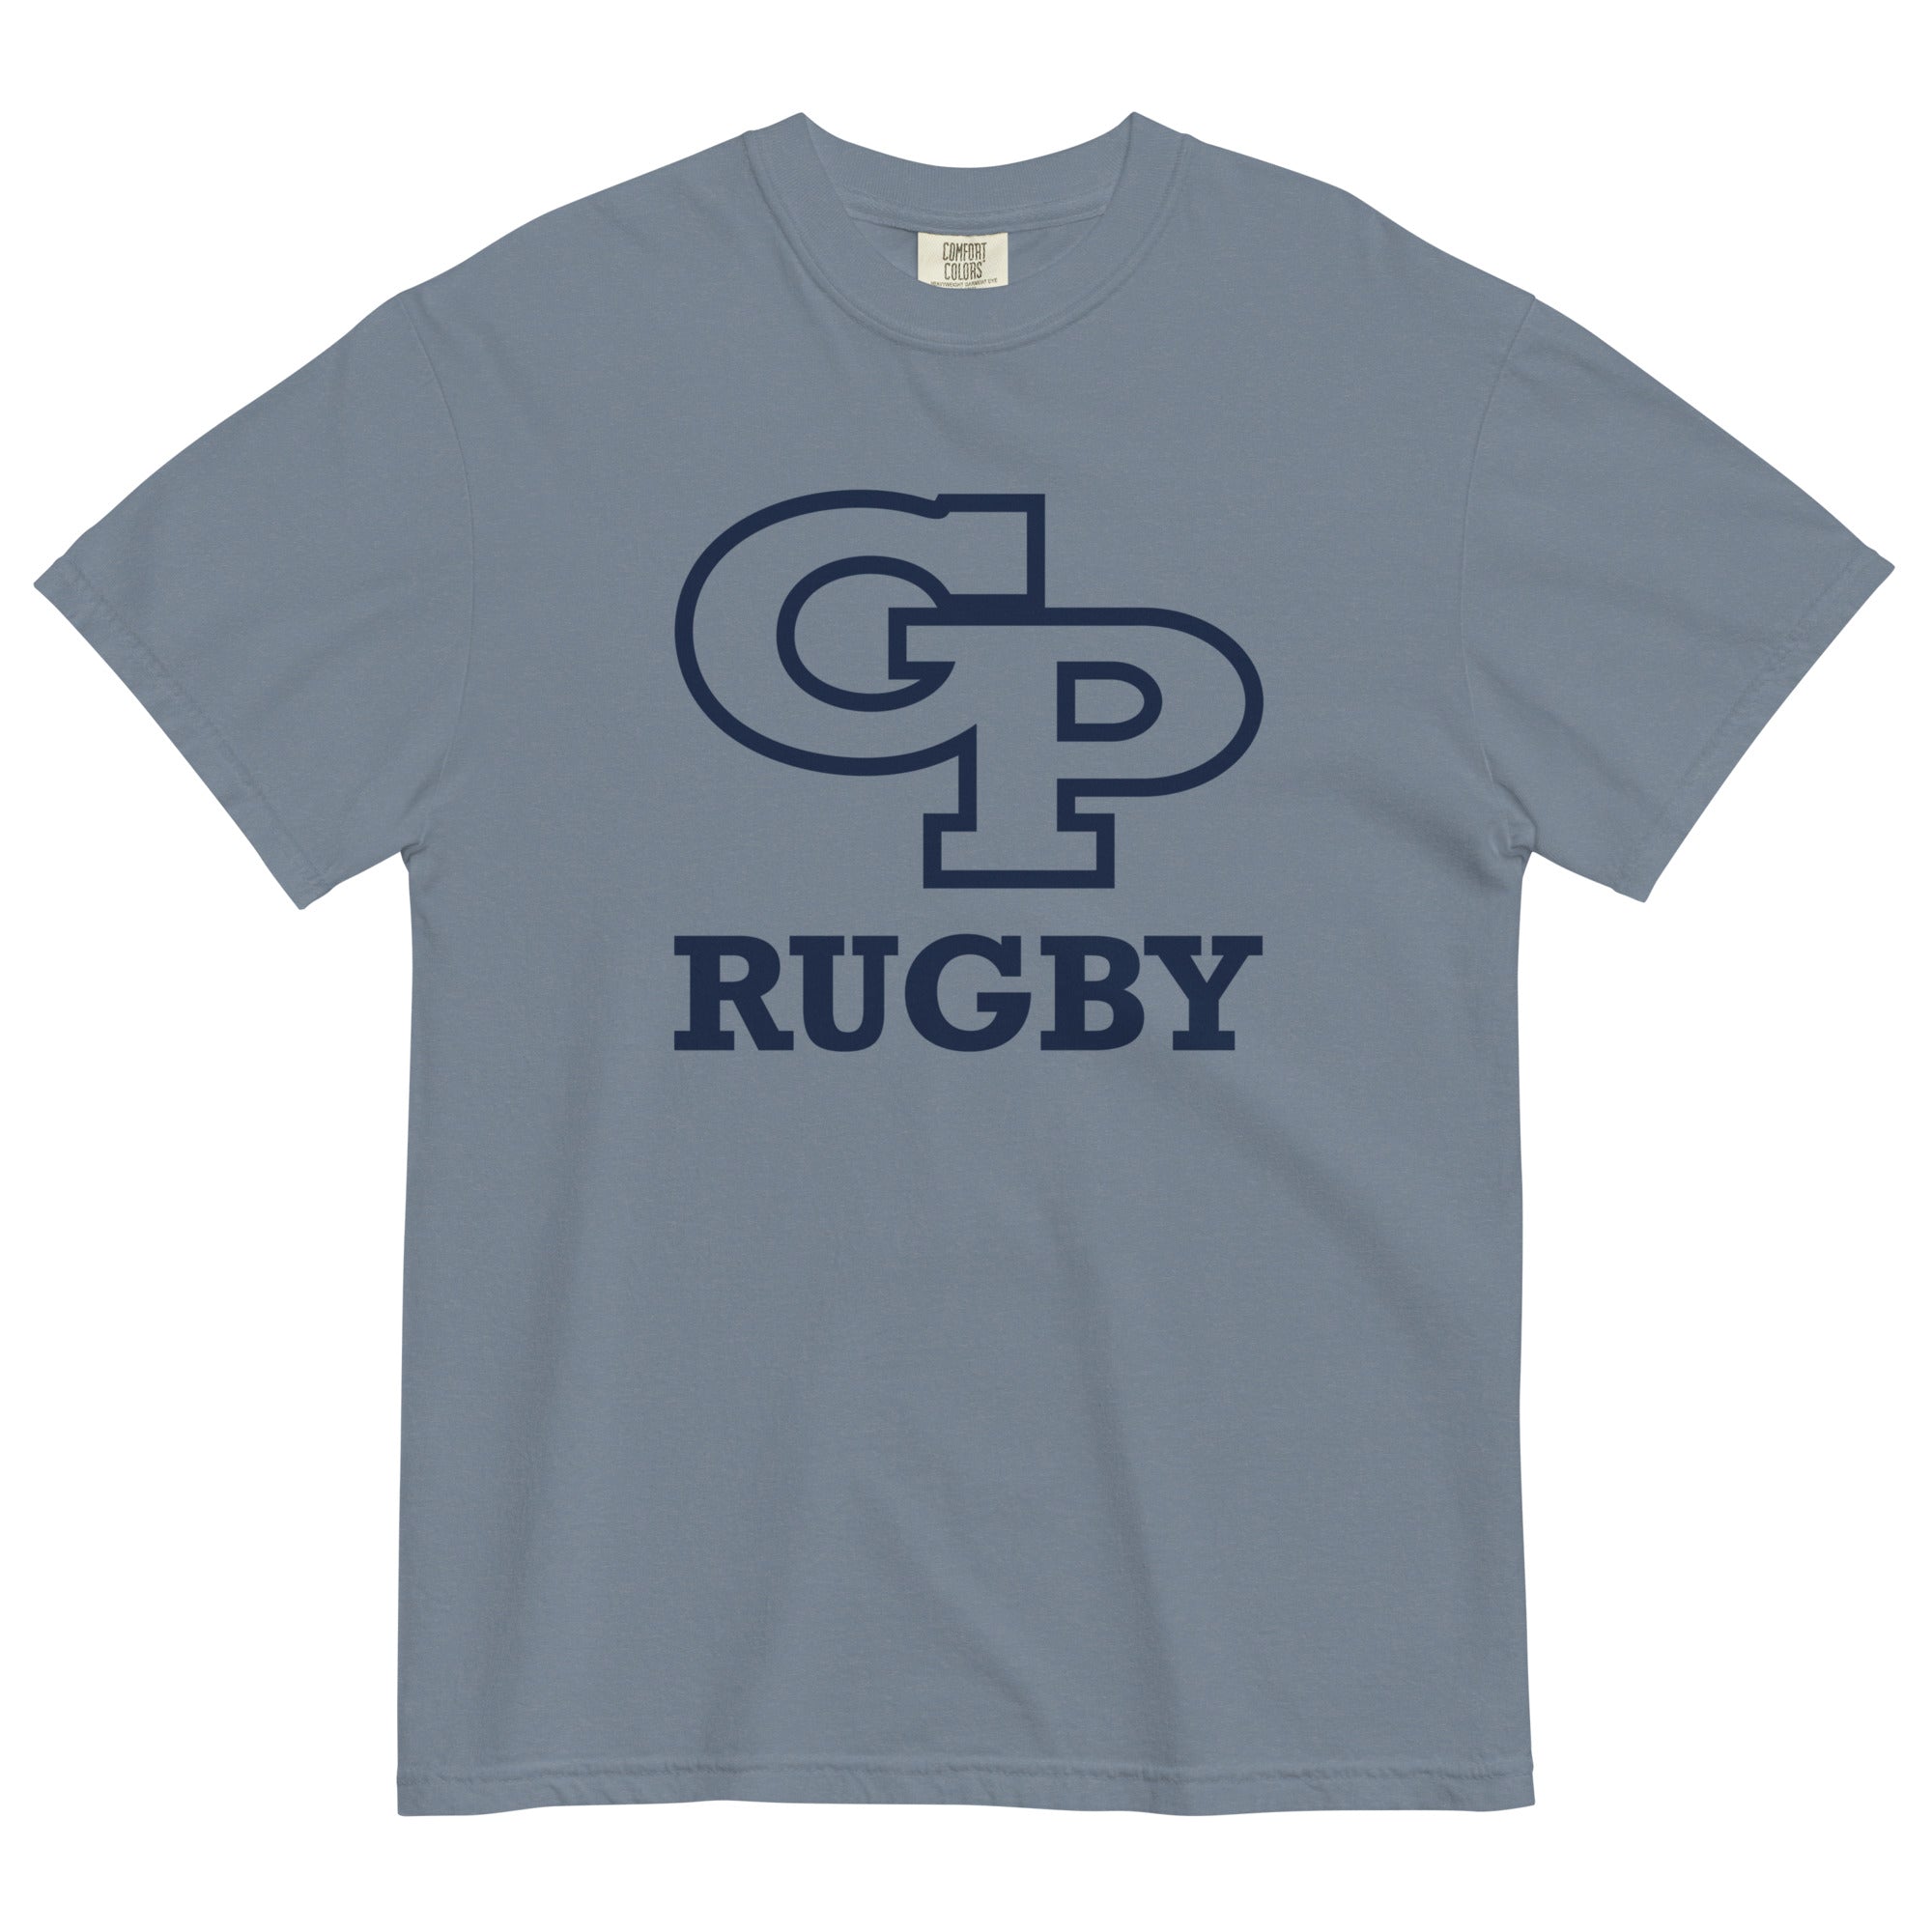 Rugby Imports Georgetown Prep Garment-Dyed T-Shirt